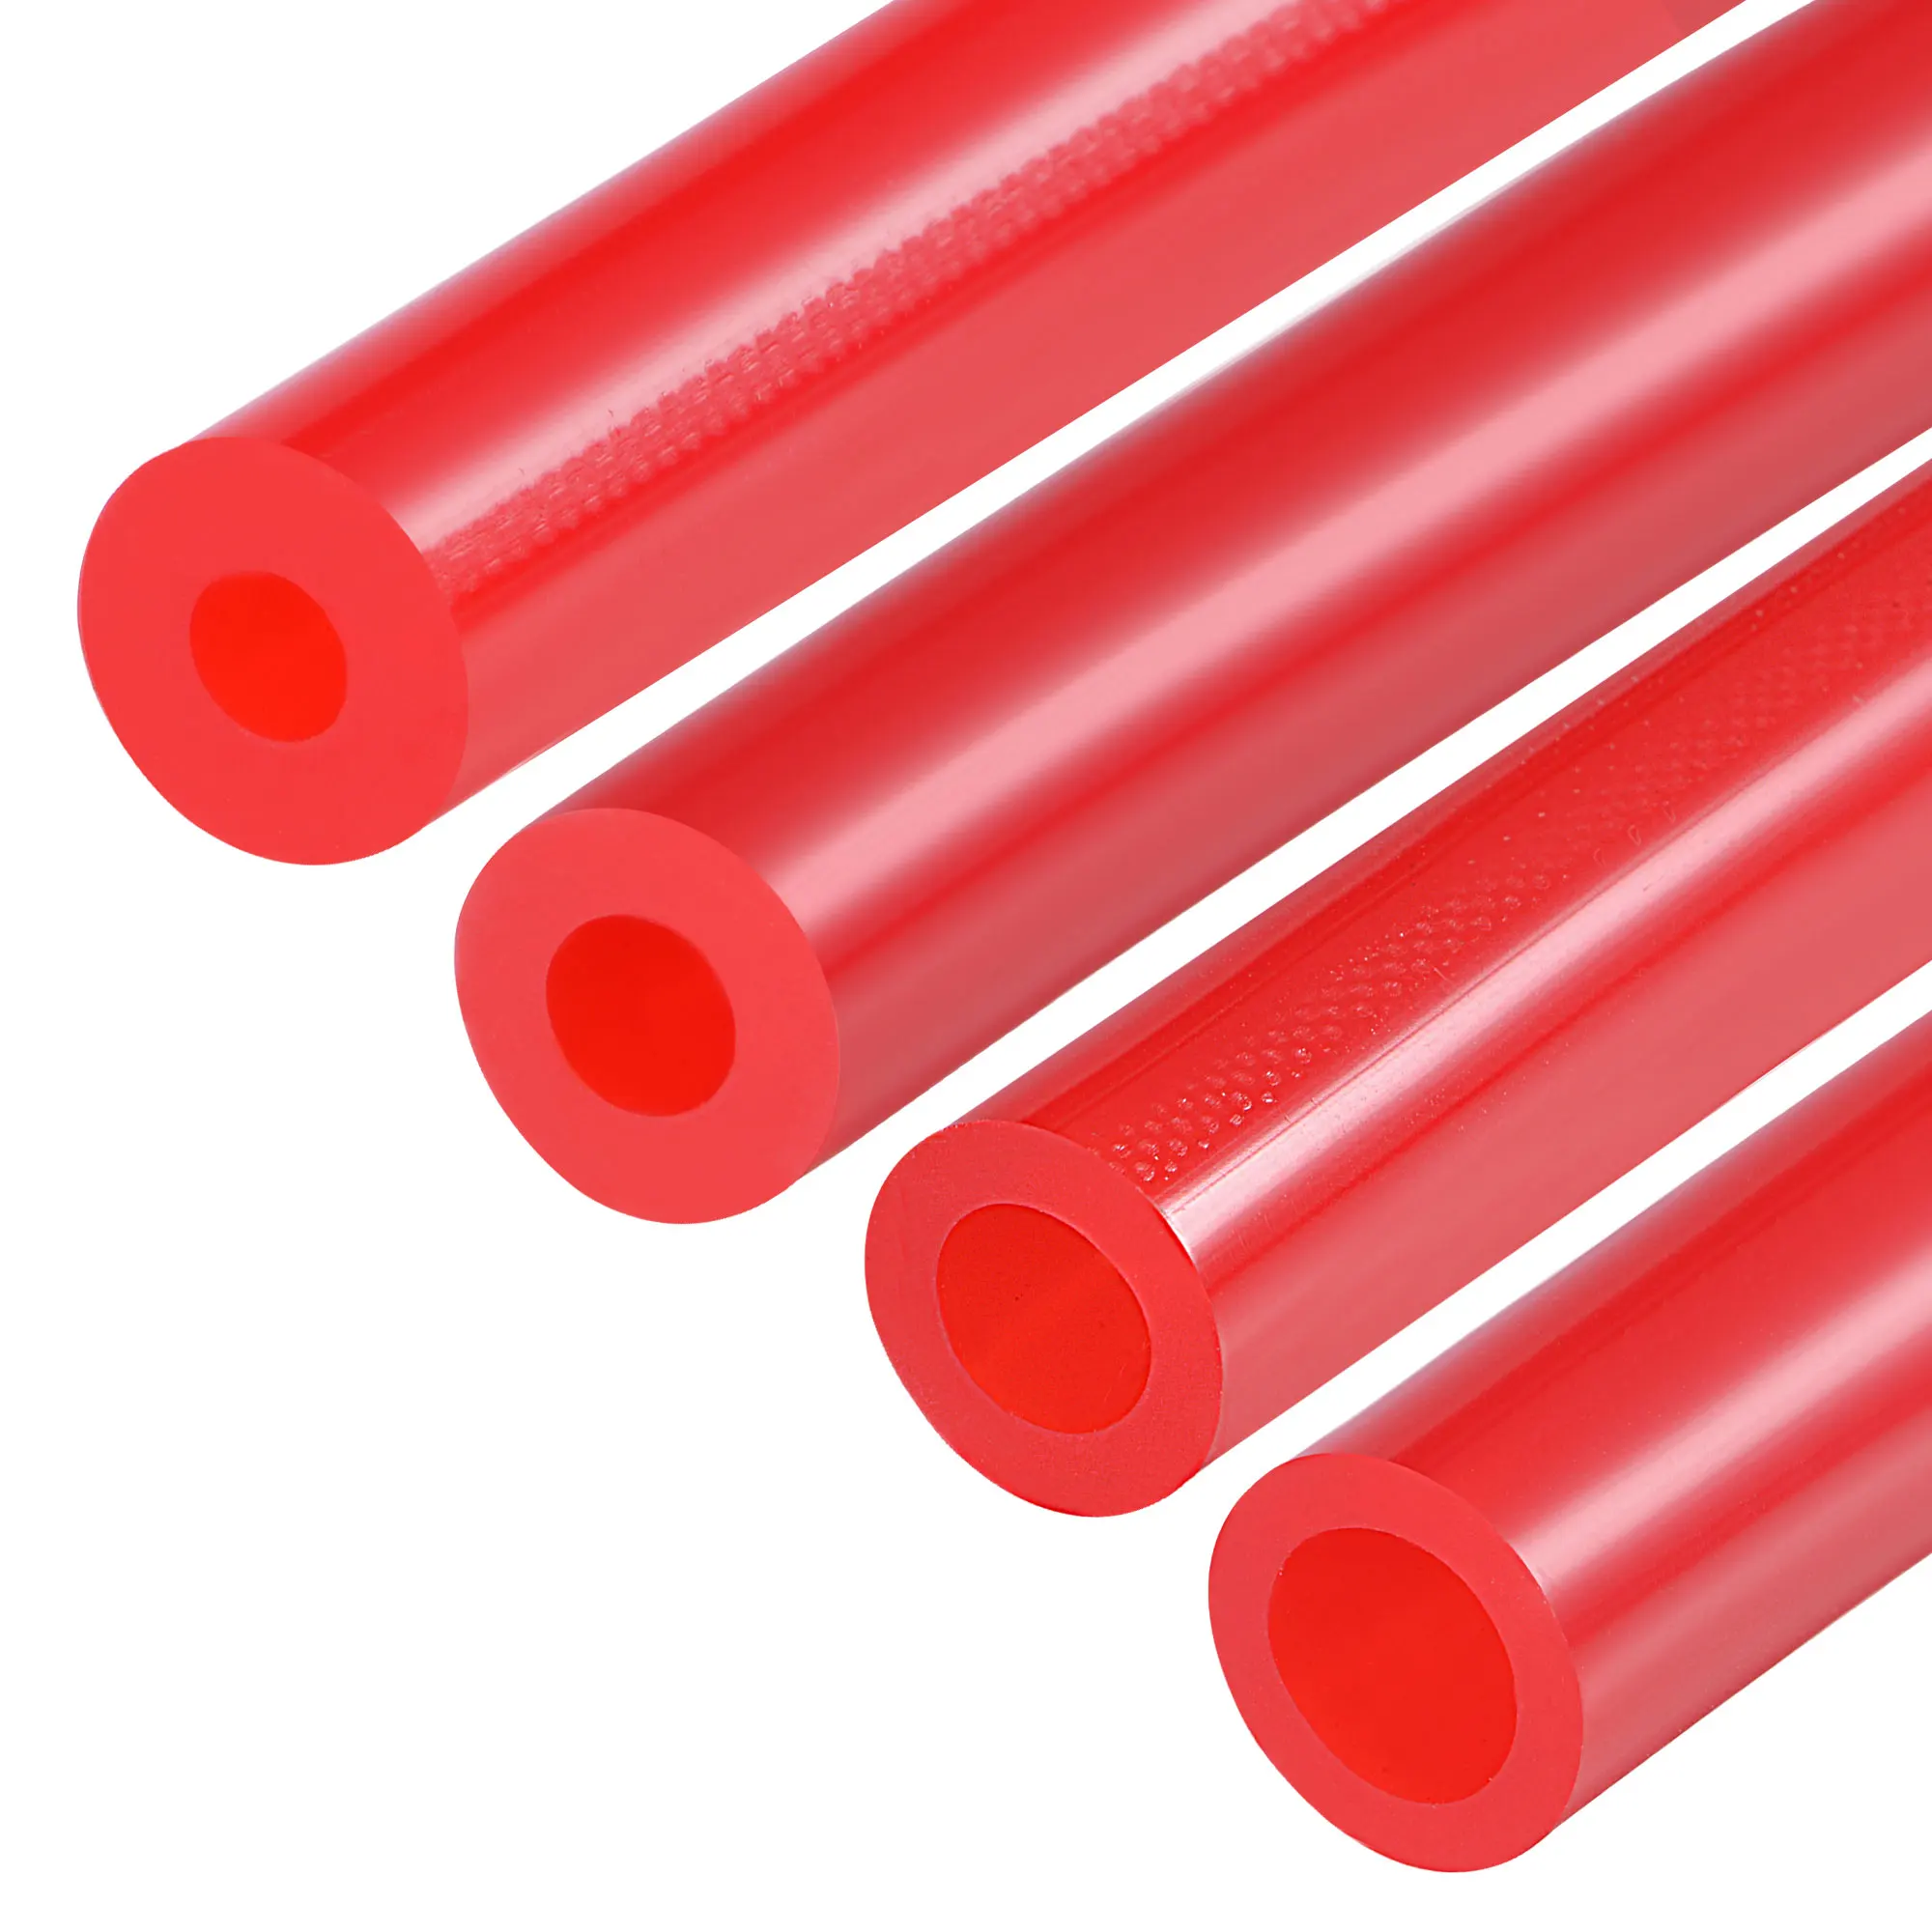 

Uxcell Vacuum Silicone Tubing Hose 5/32" 1/4" 5/16" 1/2" ID 1/8" Wall Thick 5ft Red High Temperature for Engine